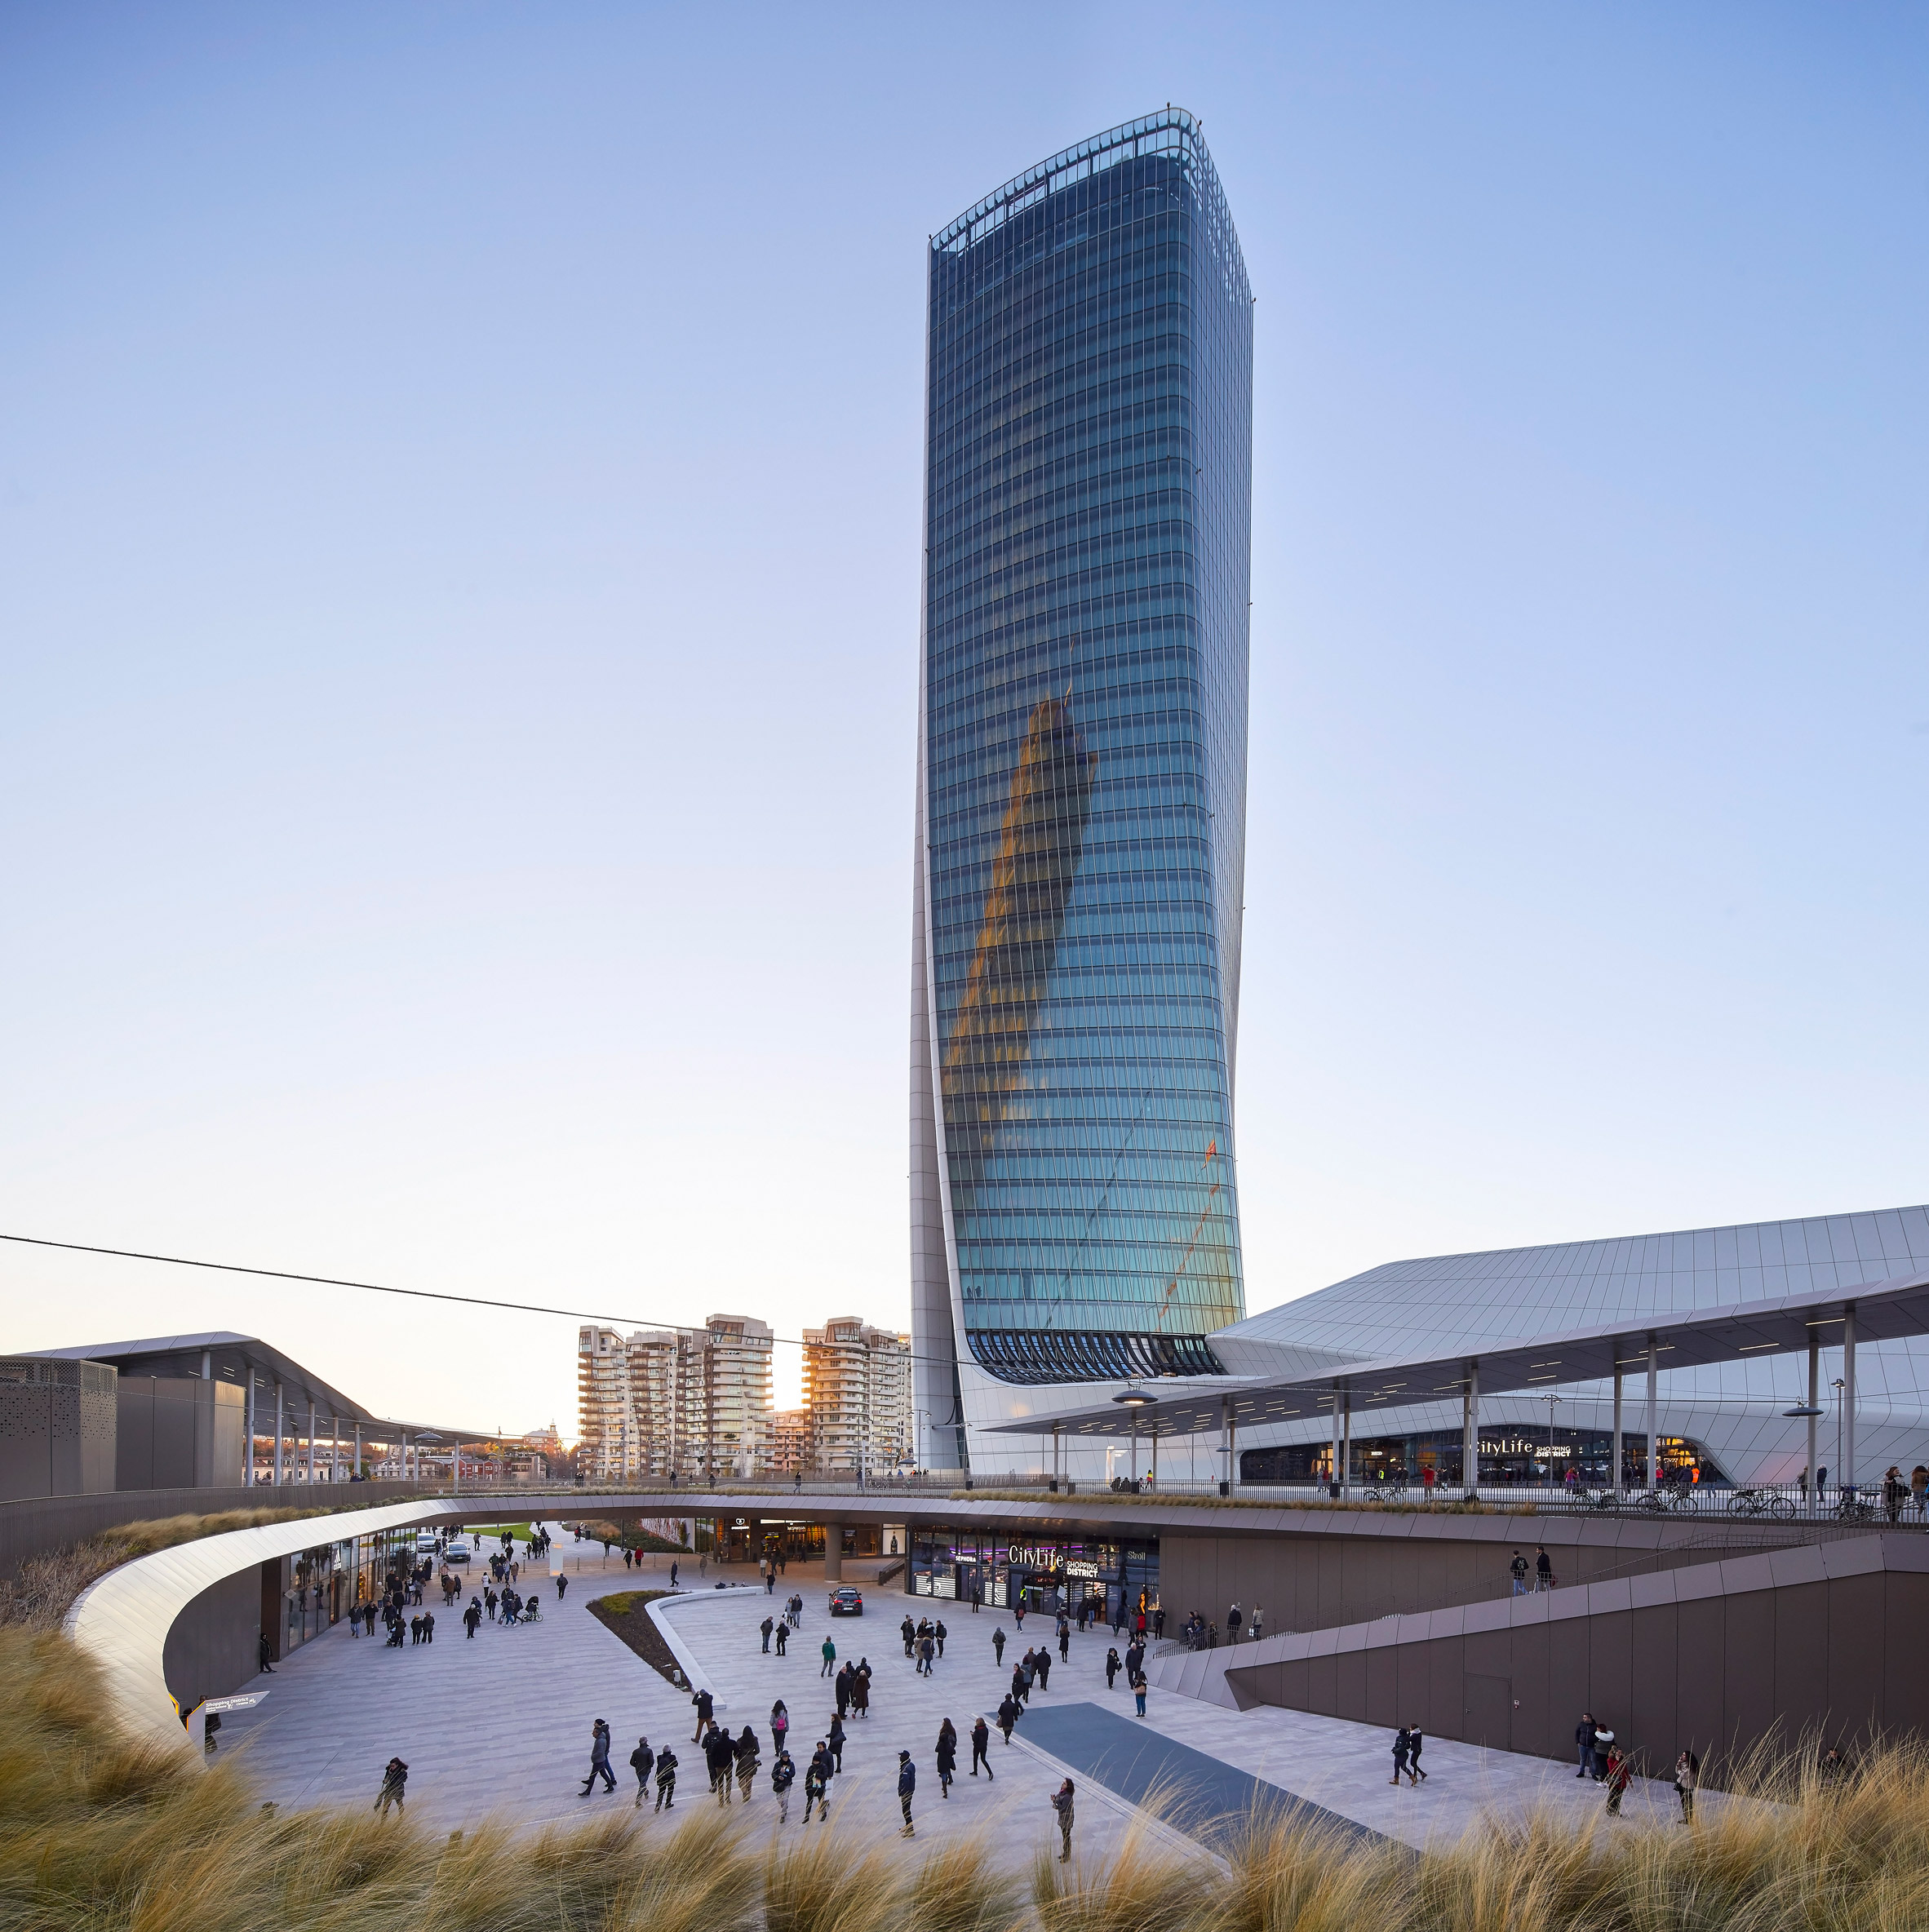 Top 10 skyscrapers: Generali Tower, Italy, by Zaha Hadid Architects